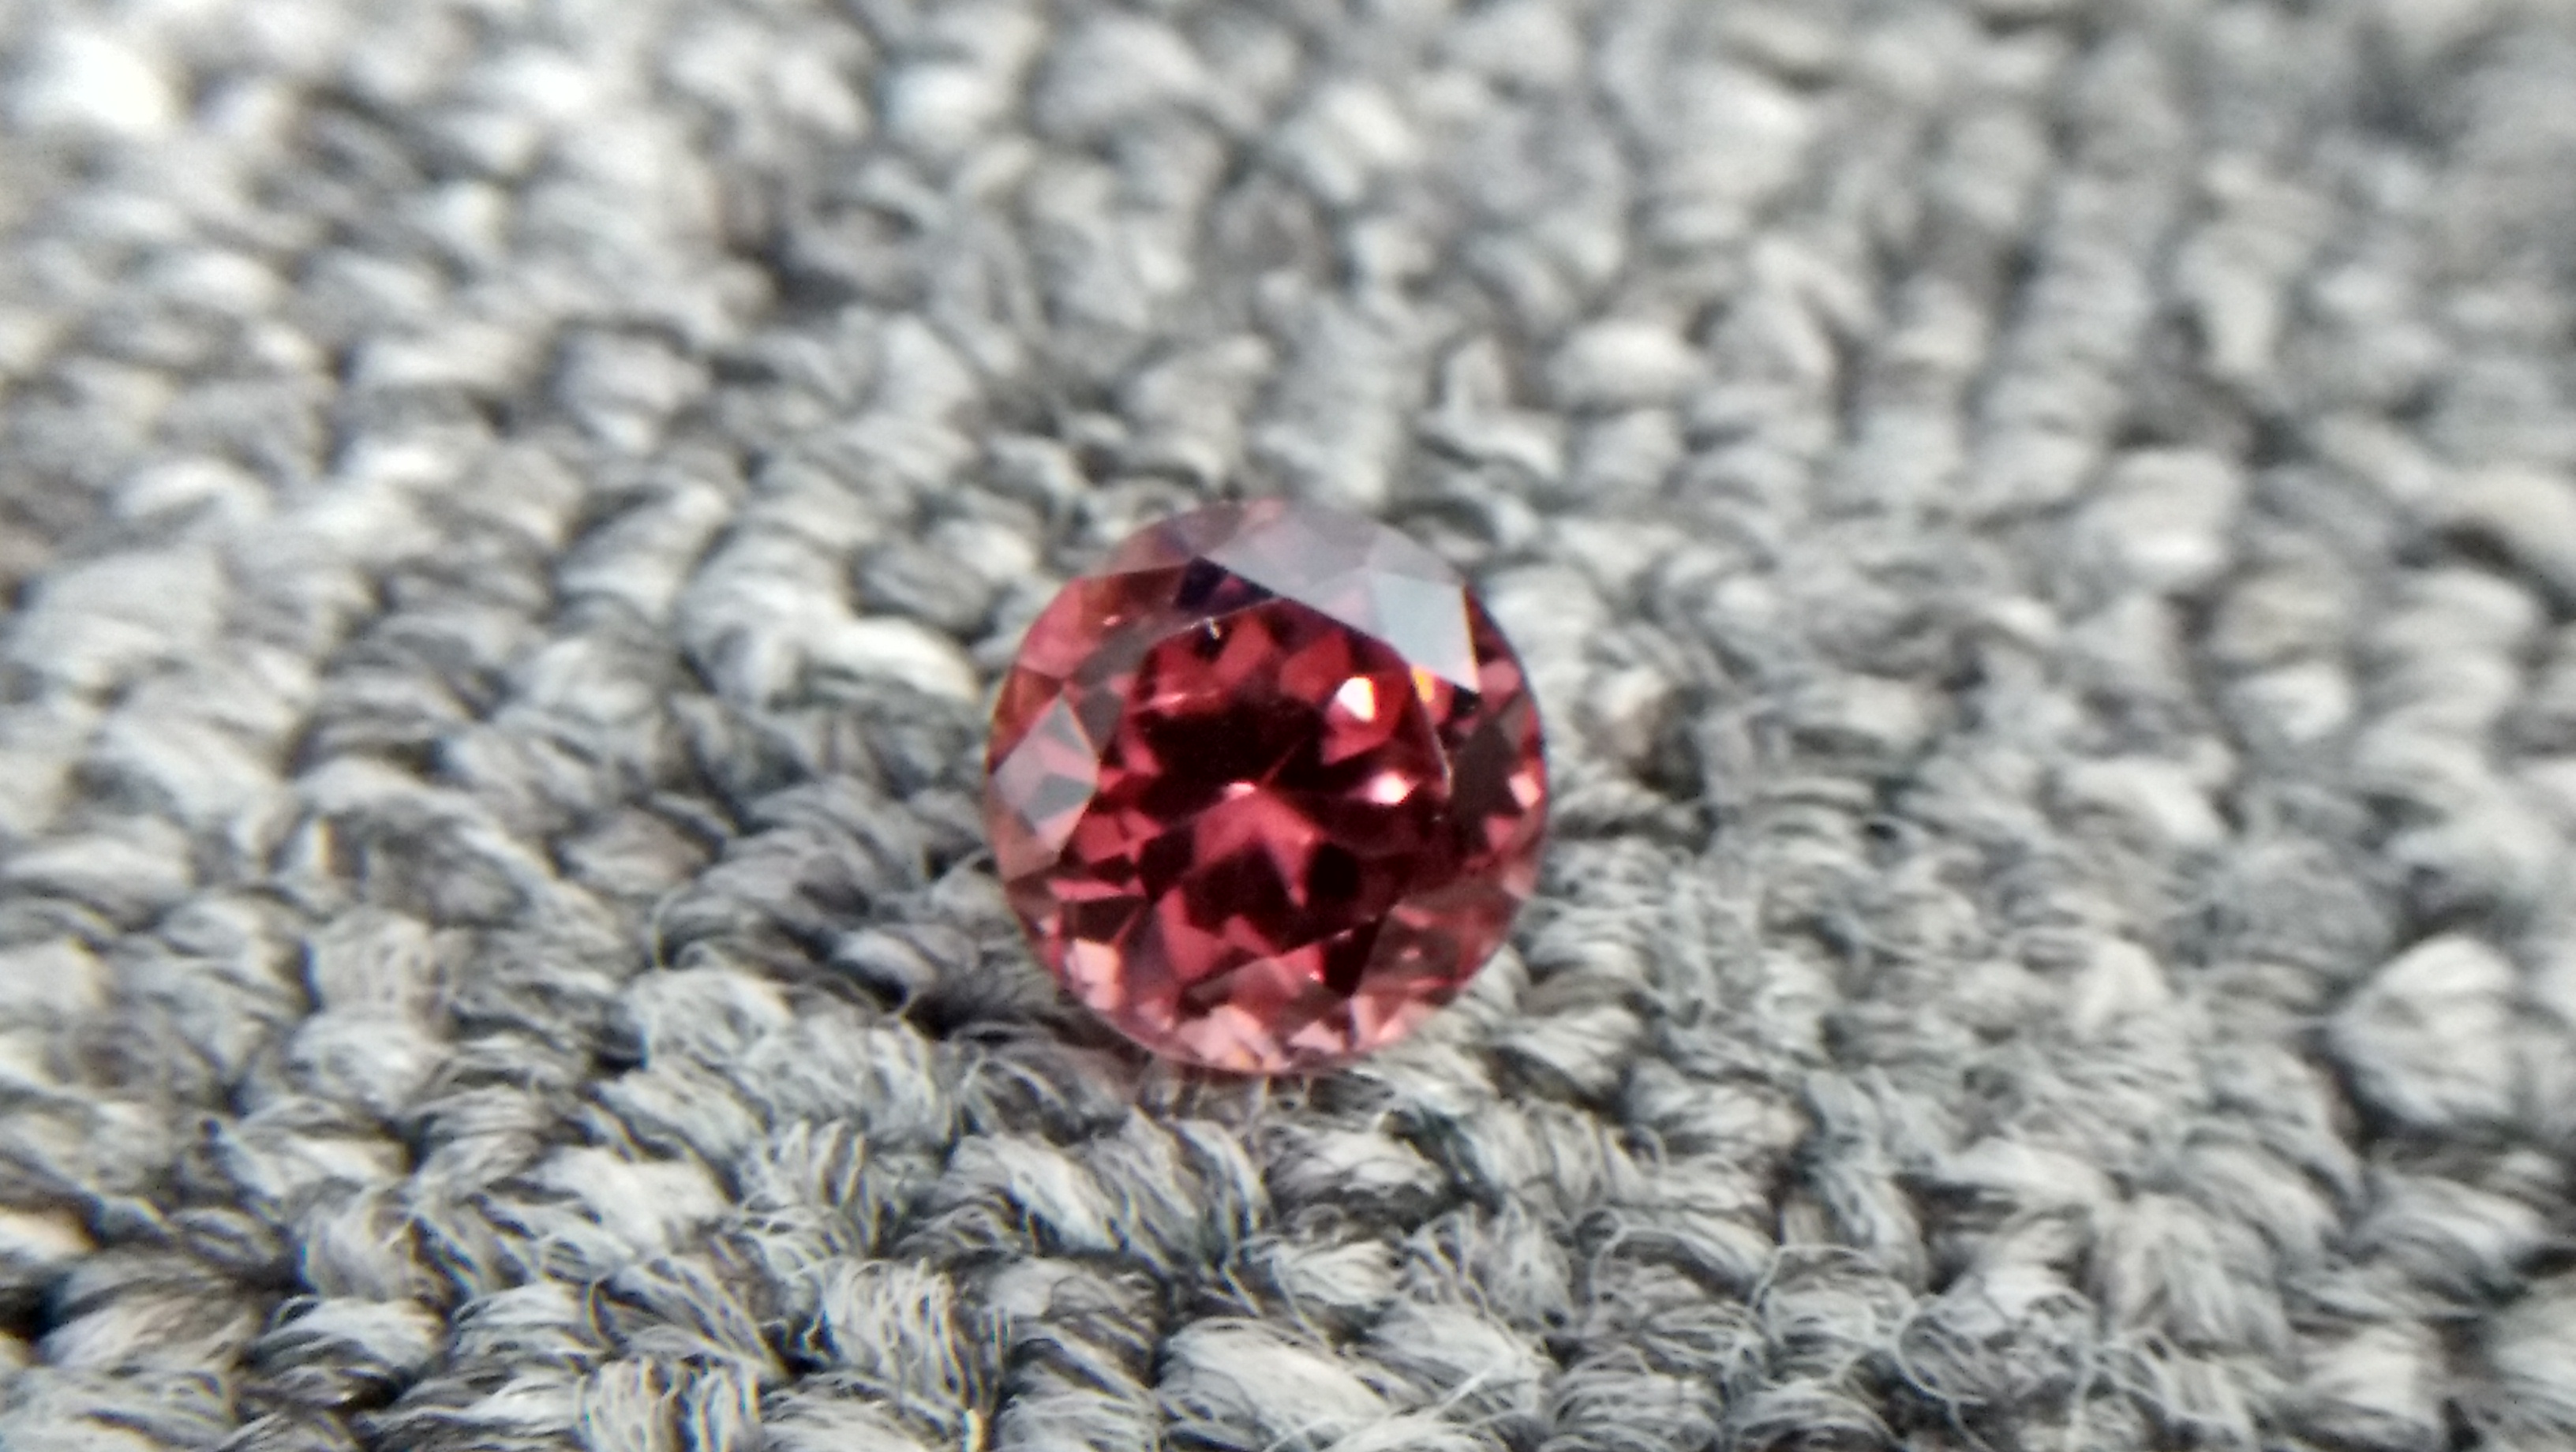 Natural Colour Change Zircon Very fine quality luster Weight: 4.45Cts Dimension: 8.7mm x 6.2mm Shape : Round Clarity : Clean Treatment : None/ Natural/ Unheated Colour: changing Colours Brown, Peach, pinkish purple, Red